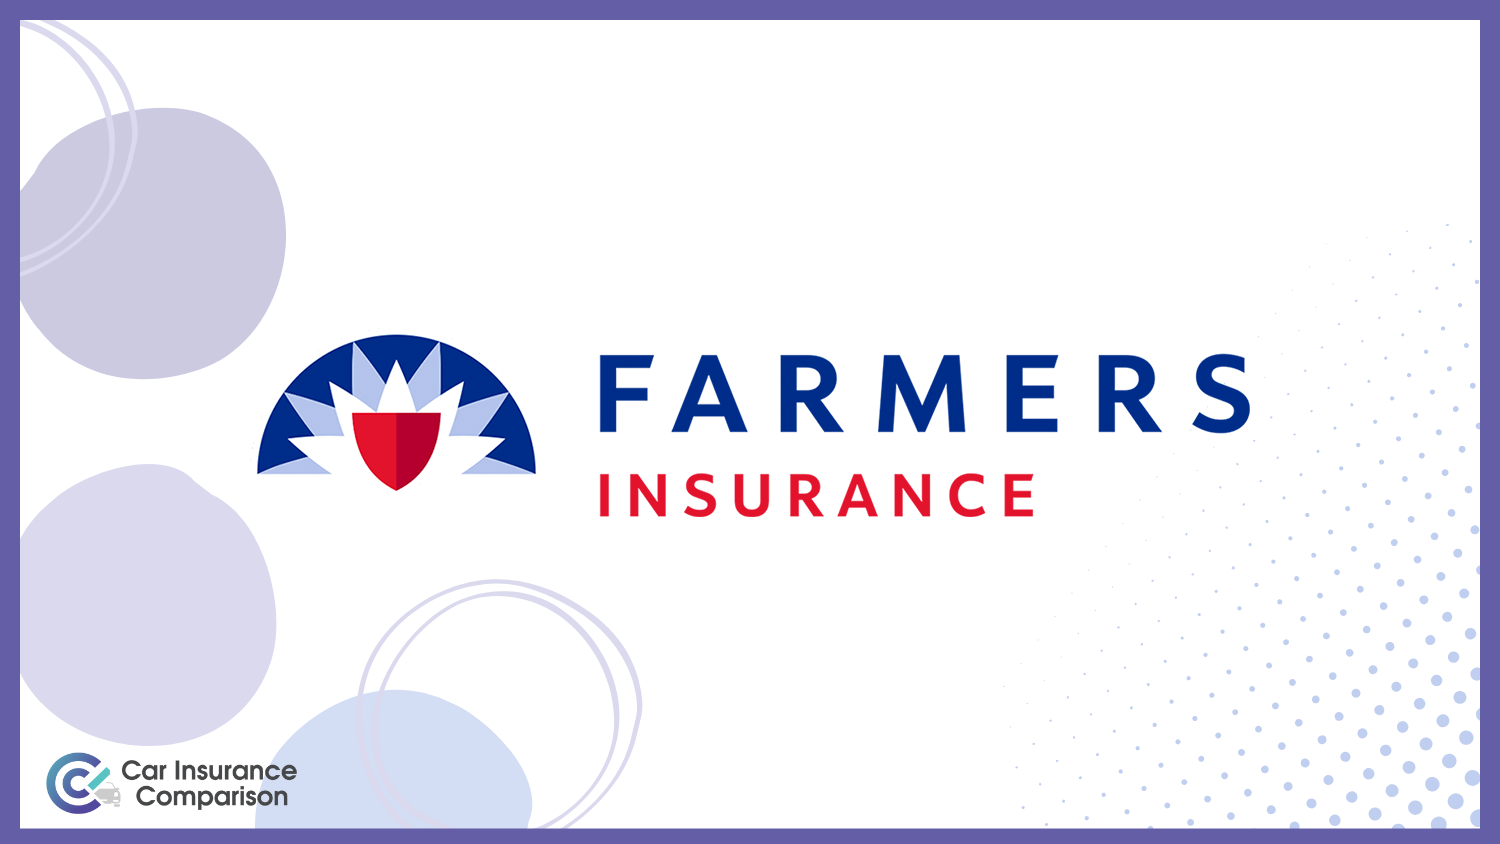 Farmers: Best Car Insurance for a Bad Driving Record